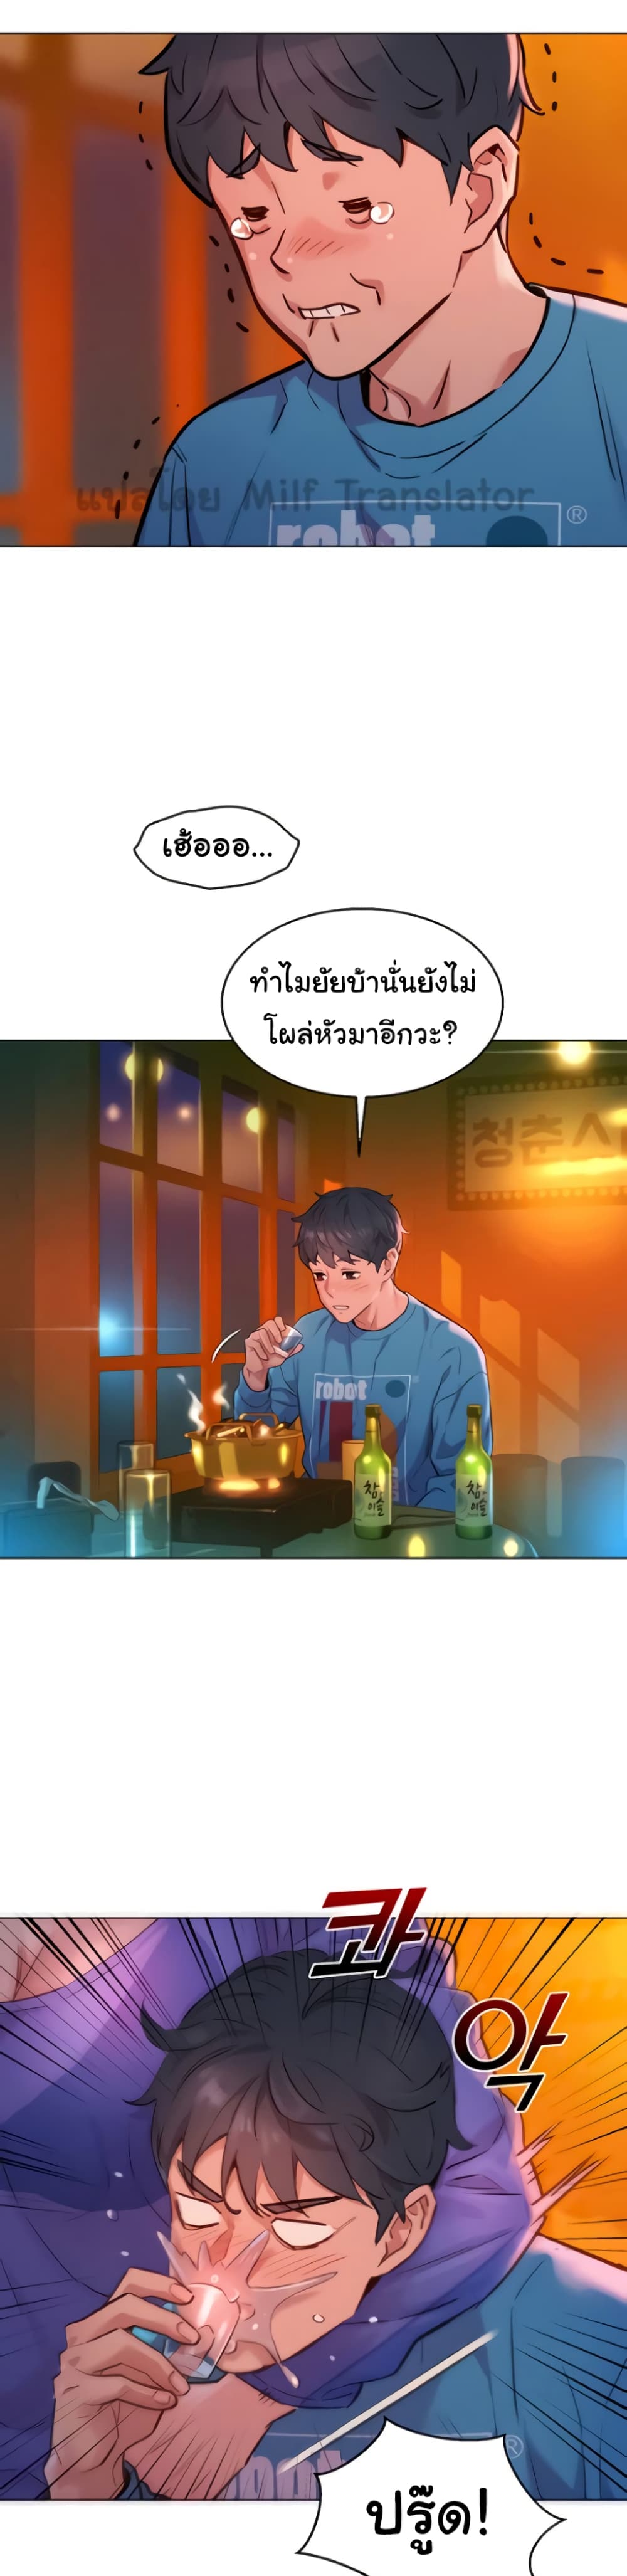 Let’s Hang Out from Today ตอนที่ 1 ภาพ 23